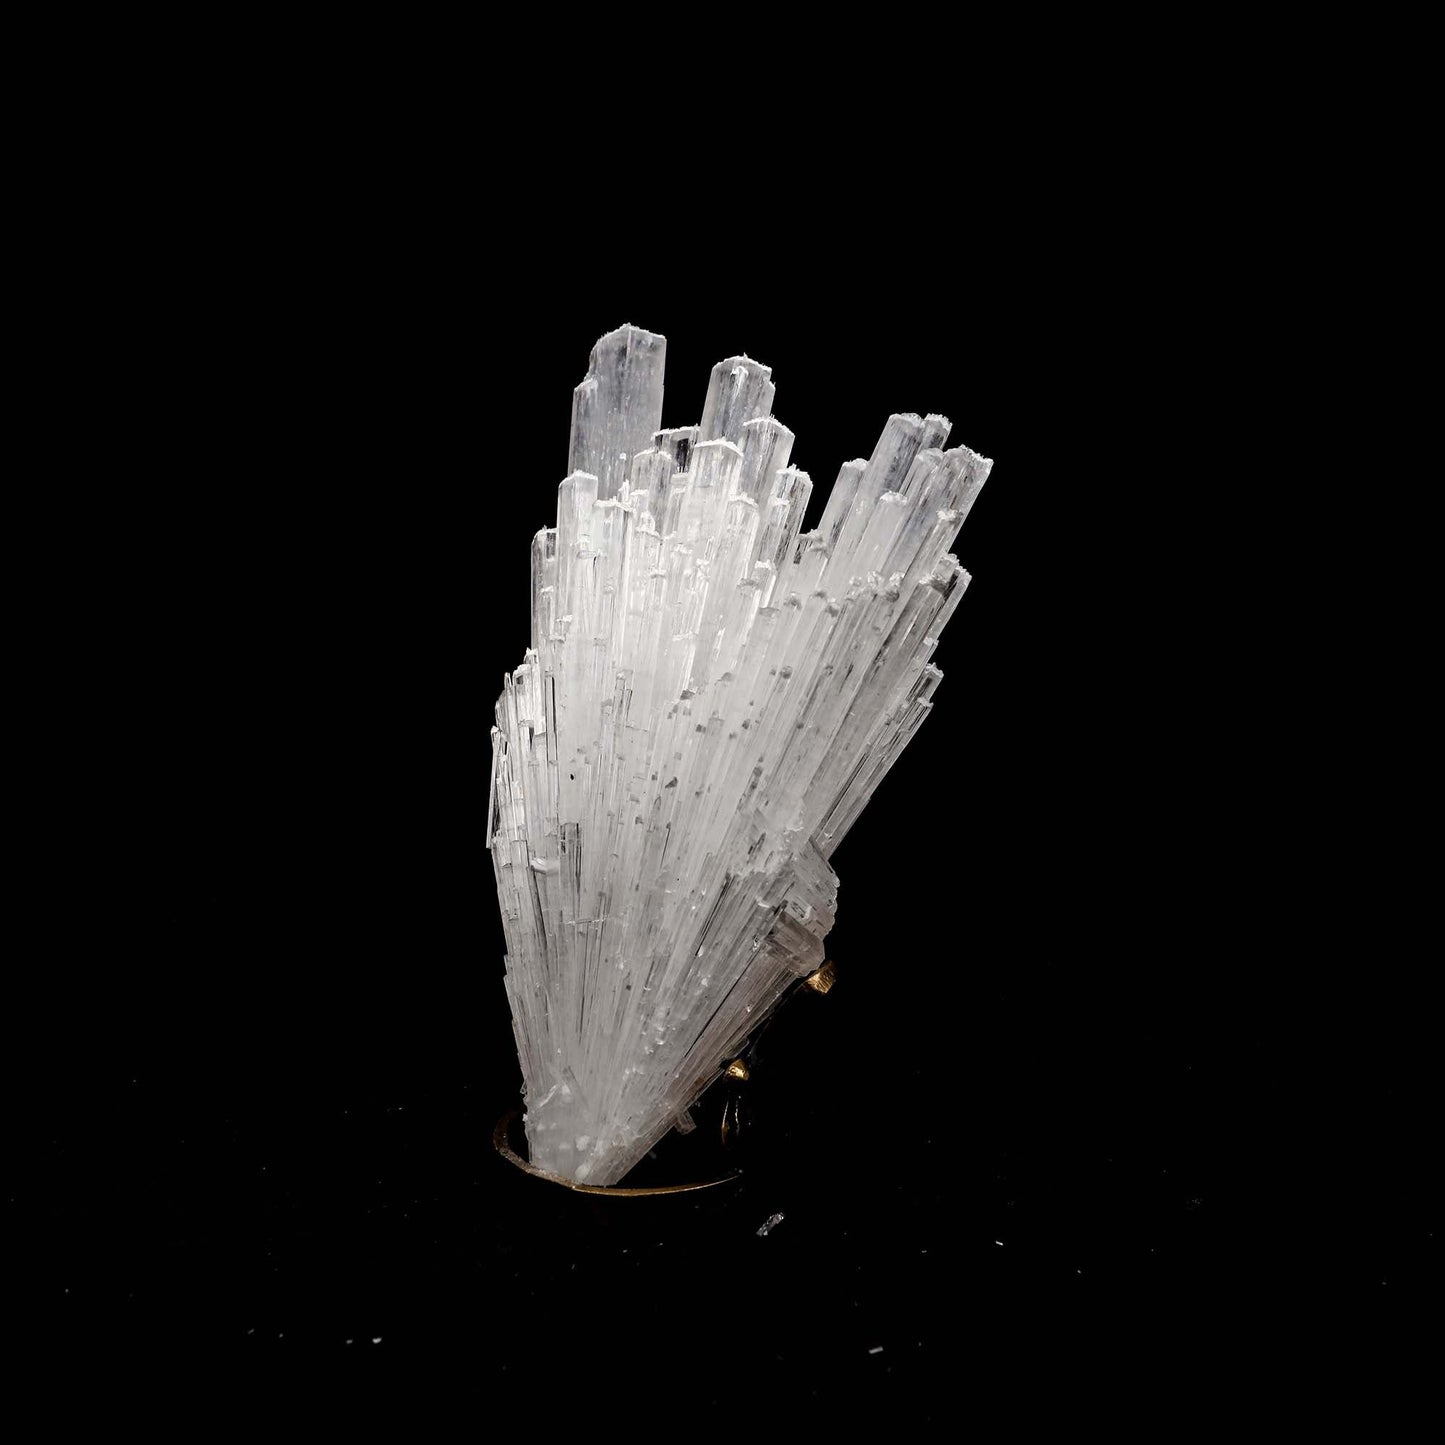 Scolecite Sprays Natural Mineral Specimen # B 5197  https://www.superbminerals.us/products/scolecite-sprays-natural-mineral-specimen-b-5197  Features: Recent discoveries in Nashik have yielded some spectacular intergrown jackstraw sprays of glassy, iridescent, clear to translucent scolecite prism. STUNNING. The stunning crystals extend in every direction. Primary Mineral(s): Scolecite Secondary Mineral(s): N/AMatrix: N/A 7 Inch x 5 InchWeight : 448